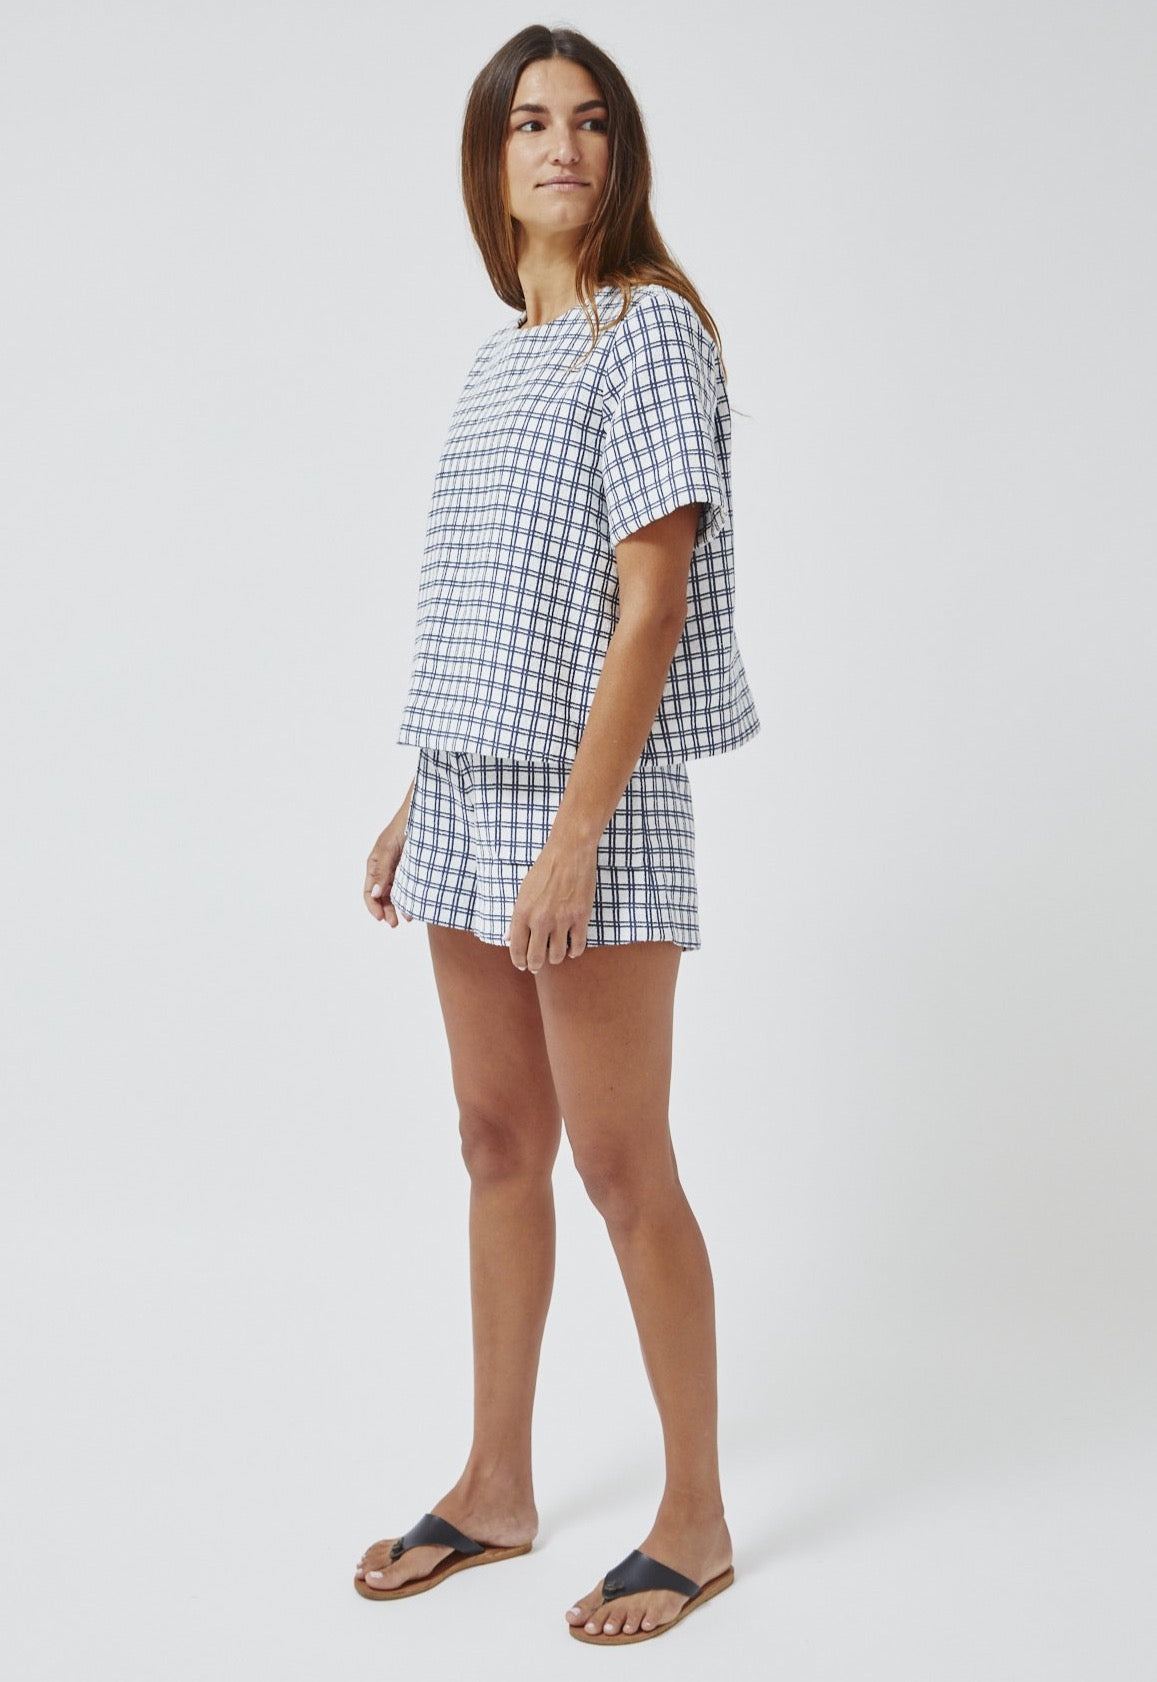 THE TRAPEZE T-SHIRT in NAVY & WHITE CHECK COTTON JACQUARD